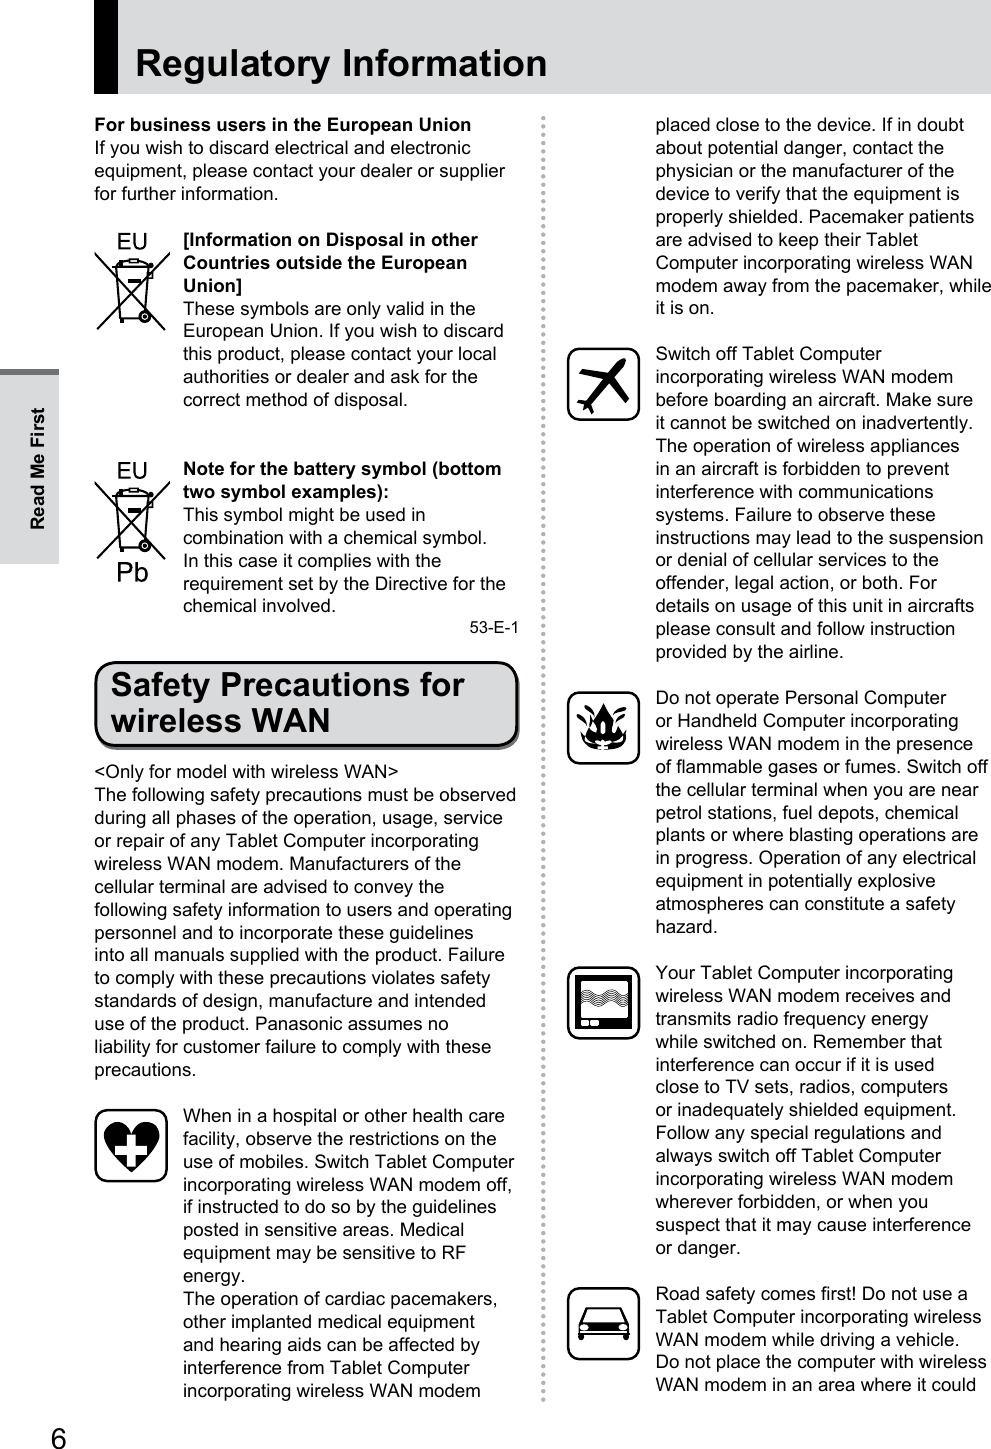 6Regulatory InformationFor business users in the European UnionIf you wish to discard electrical and electronic equipment, please contact your dealer or supplier for further information.[Information on Disposal in other Countries outside the European Union]These symbols are only valid in the European Union. If you wish to discard this product, please contact your local authorities or dealer and ask for the correct method of disposal.Note for the battery symbol (bottom two symbol examples):This symbol might be used in combination with a chemical symbol. In this case it complies with the requirement set by the Directive for the chemical involved.53-E-1Safety Precautions for wireless WAN&lt;Only for model with wireless WAN&gt;The following safety precautions must be observed during all phases of the operation, usage, service or repair of any Tablet Computer incorporating wireless WAN modem. Manufacturers of the cellular terminal are advised to convey the following safety information to users and operating personnel and to incorporate these guidelines into all manuals supplied with the product. Failure to comply with these precautions violates safety standards of design, manufacture and intended use of the product. Panasonic assumes no liability for customer failure to comply with these precautions.When in a hospital or other health care facility, observe the restrictions on the use of mobiles. Switch Tablet Computer incorporating wireless WAN modem off, if instructed to do so by the guidelines posted in sensitive areas. Medical equipment may be sensitive to RF energy.The operation of cardiac pacemakers, other implanted medical equipment and hearing aids can be affected by interference from Tablet Computer incorporating wireless WAN modem placed close to the device. If in doubt about potential danger, contact the physician or the manufacturer of the device to verify that the equipment is properly shielded. Pacemaker patients are advised to keep their Tablet Computer incorporating wireless WAN modem away from the pacemaker, while it is on.Switch off Tablet Computer incorporating wireless WAN modem before boarding an aircraft. Make sure it cannot be switched on inadvertently. The operation of wireless appliances in an aircraft is forbidden to prevent interference with communications systems. Failure to observe these instructions may lead to the suspension or denial of cellular services to the offender, legal action, or both. For details on usage of this unit in aircrafts please consult and follow instruction provided by the airline.Do not operate Personal Computer or Handheld Computer incorporating wireless WAN modem in the presence of flammable gases or fumes. Switch off the cellular terminal when you are near petrol stations, fuel depots, chemical plants or where blasting operations are in progress. Operation of any electrical equipment in potentially explosive atmospheres can constitute a safety hazard.Your Tablet Computer incorporating wireless WAN modem receives and transmits radio frequency energy while switched on. Remember that interference can occur if it is used close to TV sets, radios, computers or inadequately shielded equipment. Follow any special regulations and always switch off Tablet Computer incorporating wireless WAN modem wherever forbidden, or when you suspect that it may cause interference or danger.Road safety comes first! Do not use a Tablet Computer incorporating wireless WAN modem while driving a vehicle. Do not place the computer with wireless WAN modem in an area where it could Read Me First